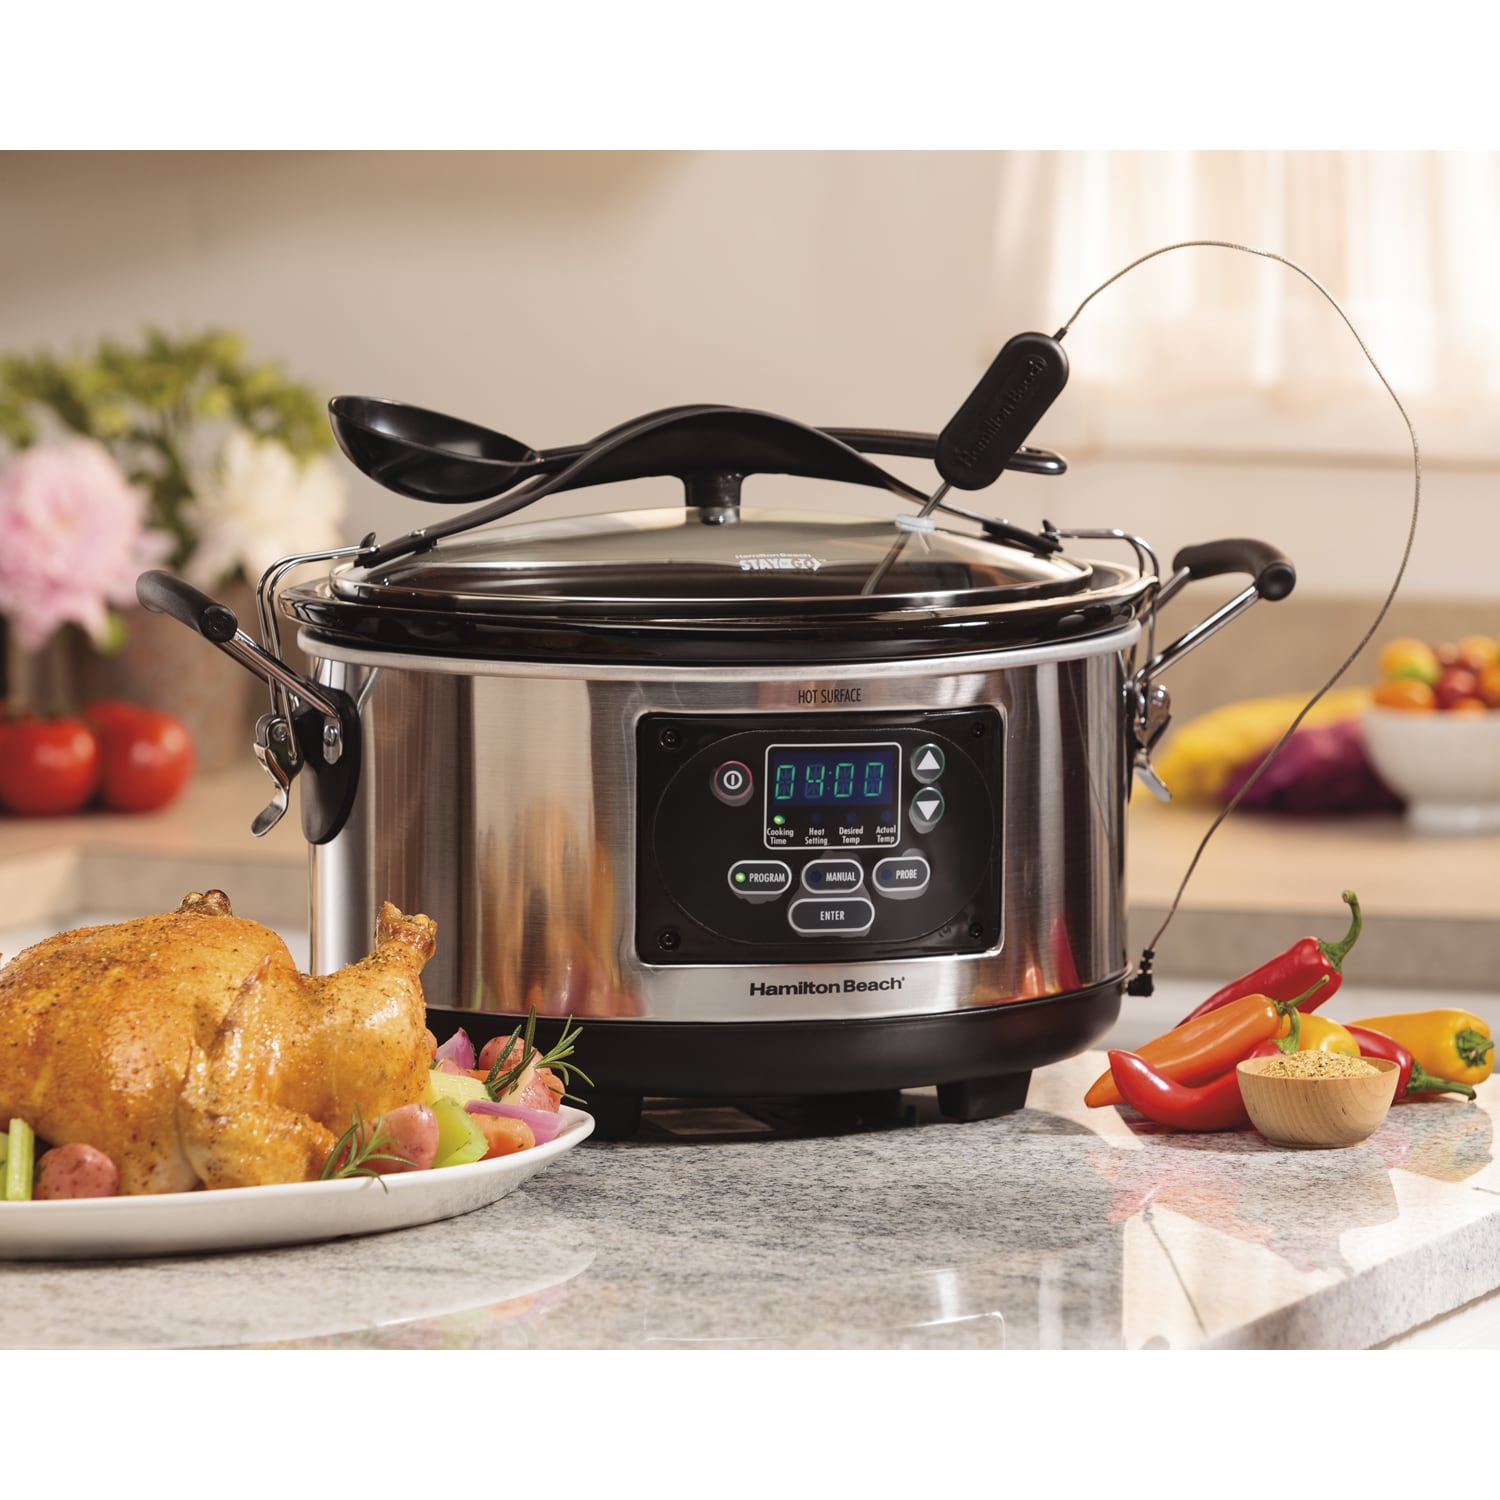 https://ak1.ostkcdn.com/images/products/4471948/Hamilton-Beach-33967-Set-n-Forget-Stainless-Steel-6-Quart-Slow-Cooker-d80303bf-6039-4f47-8010-1a1425e5a8af.jpg